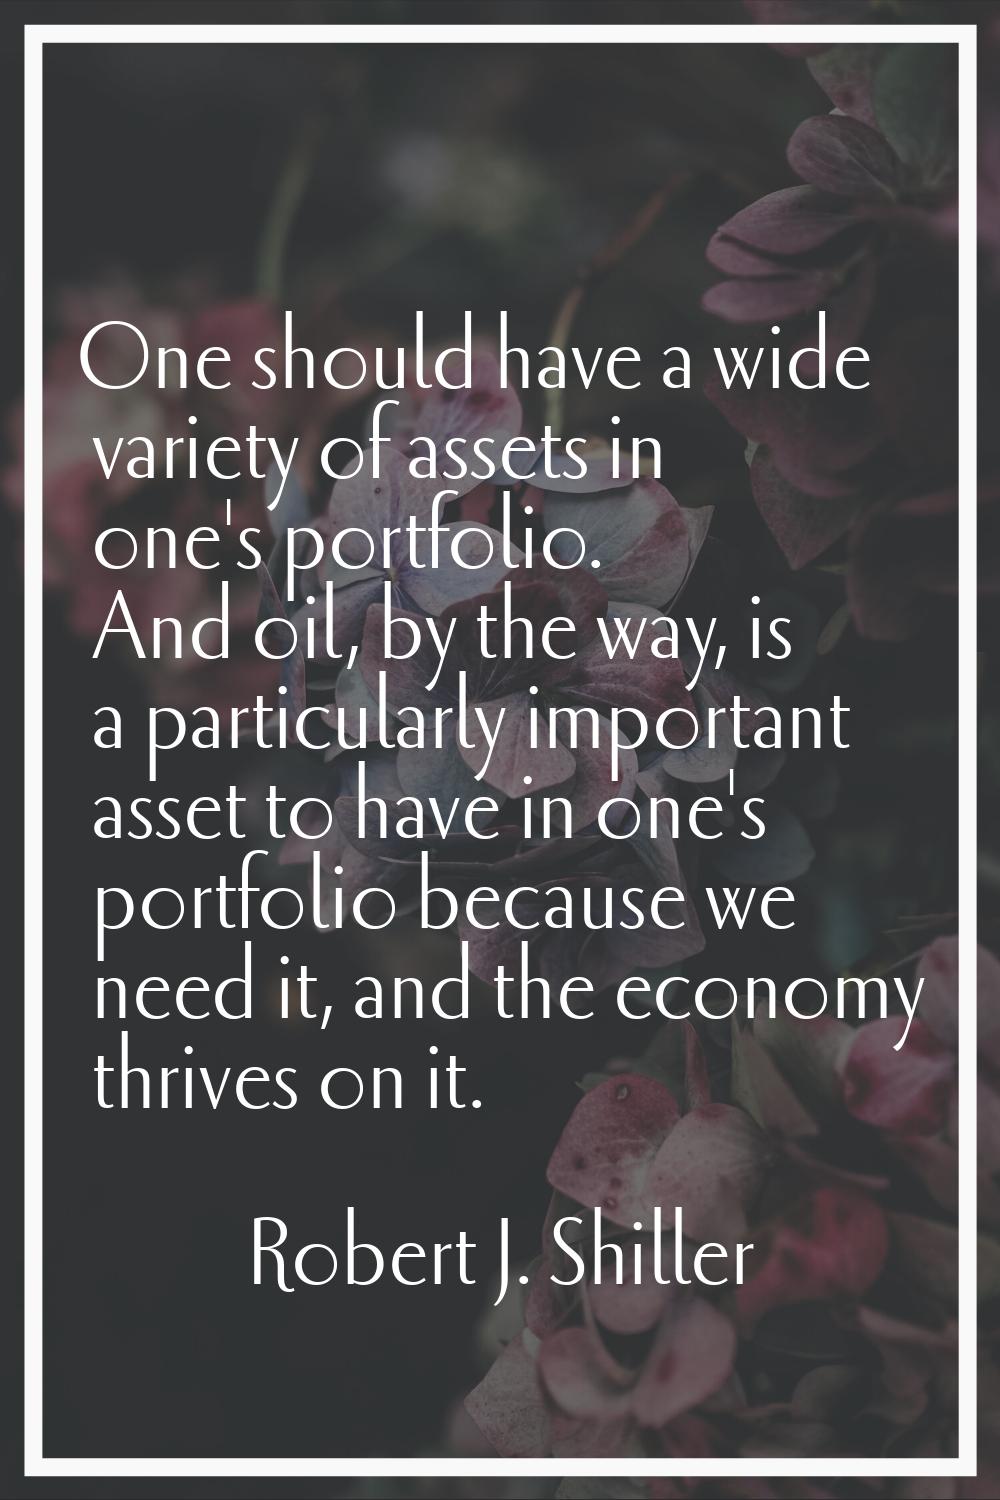 One should have a wide variety of assets in one's portfolio. And oil, by the way, is a particularly